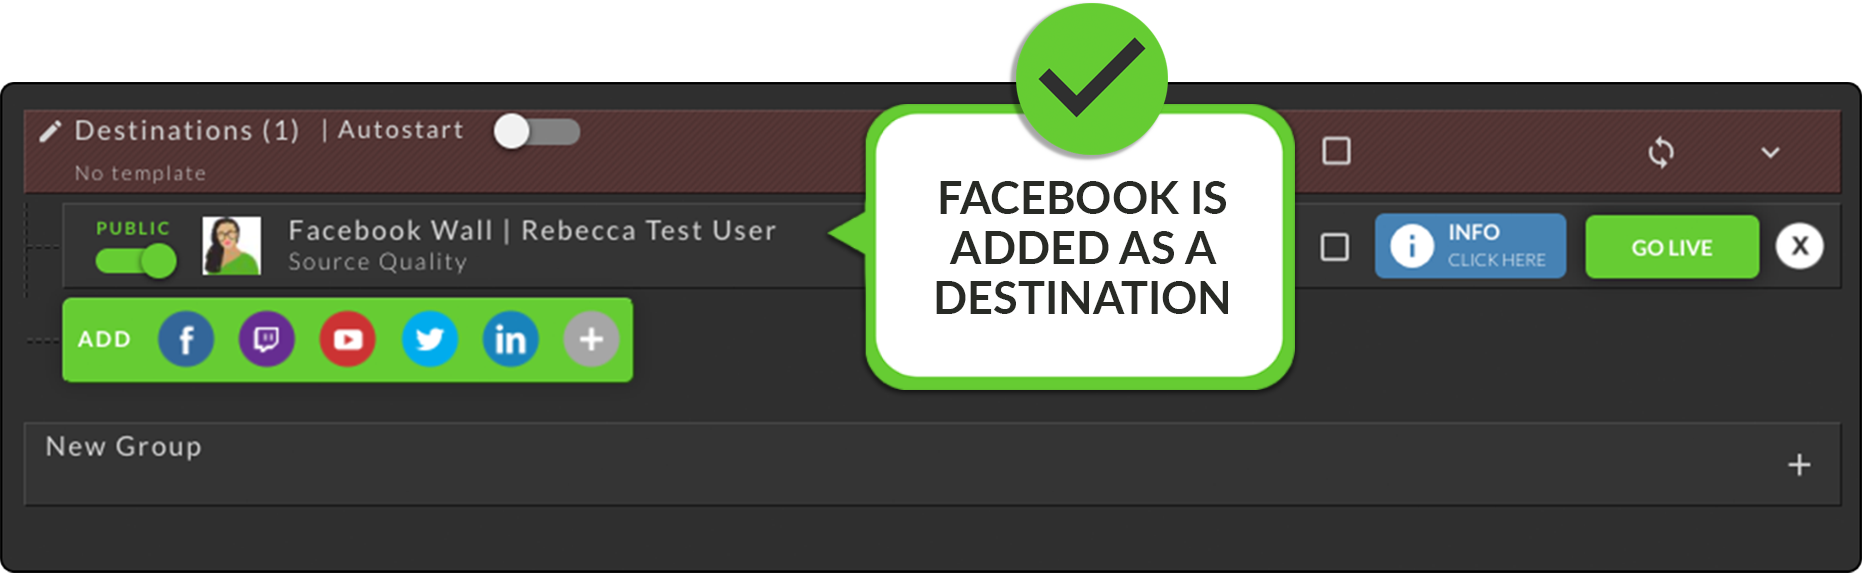 facebook__added_as_a_destination.png